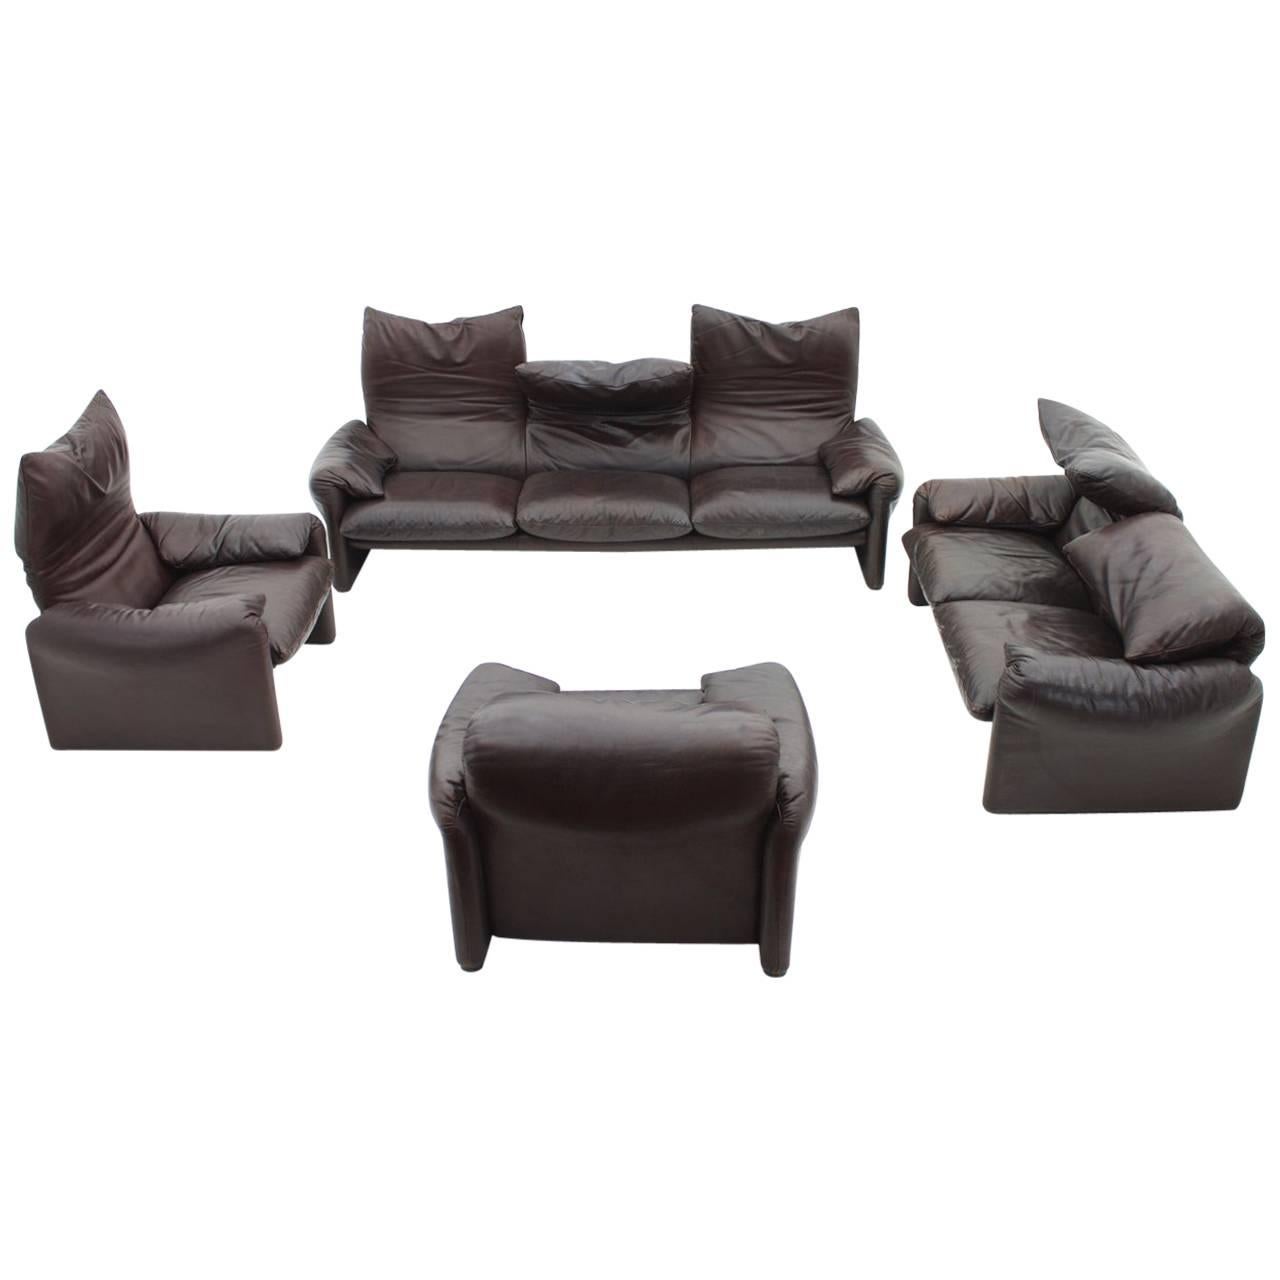 Large Leather Lounge Group "Maralunga" with Chairs and Sofas by Vico Magistretti For Sale